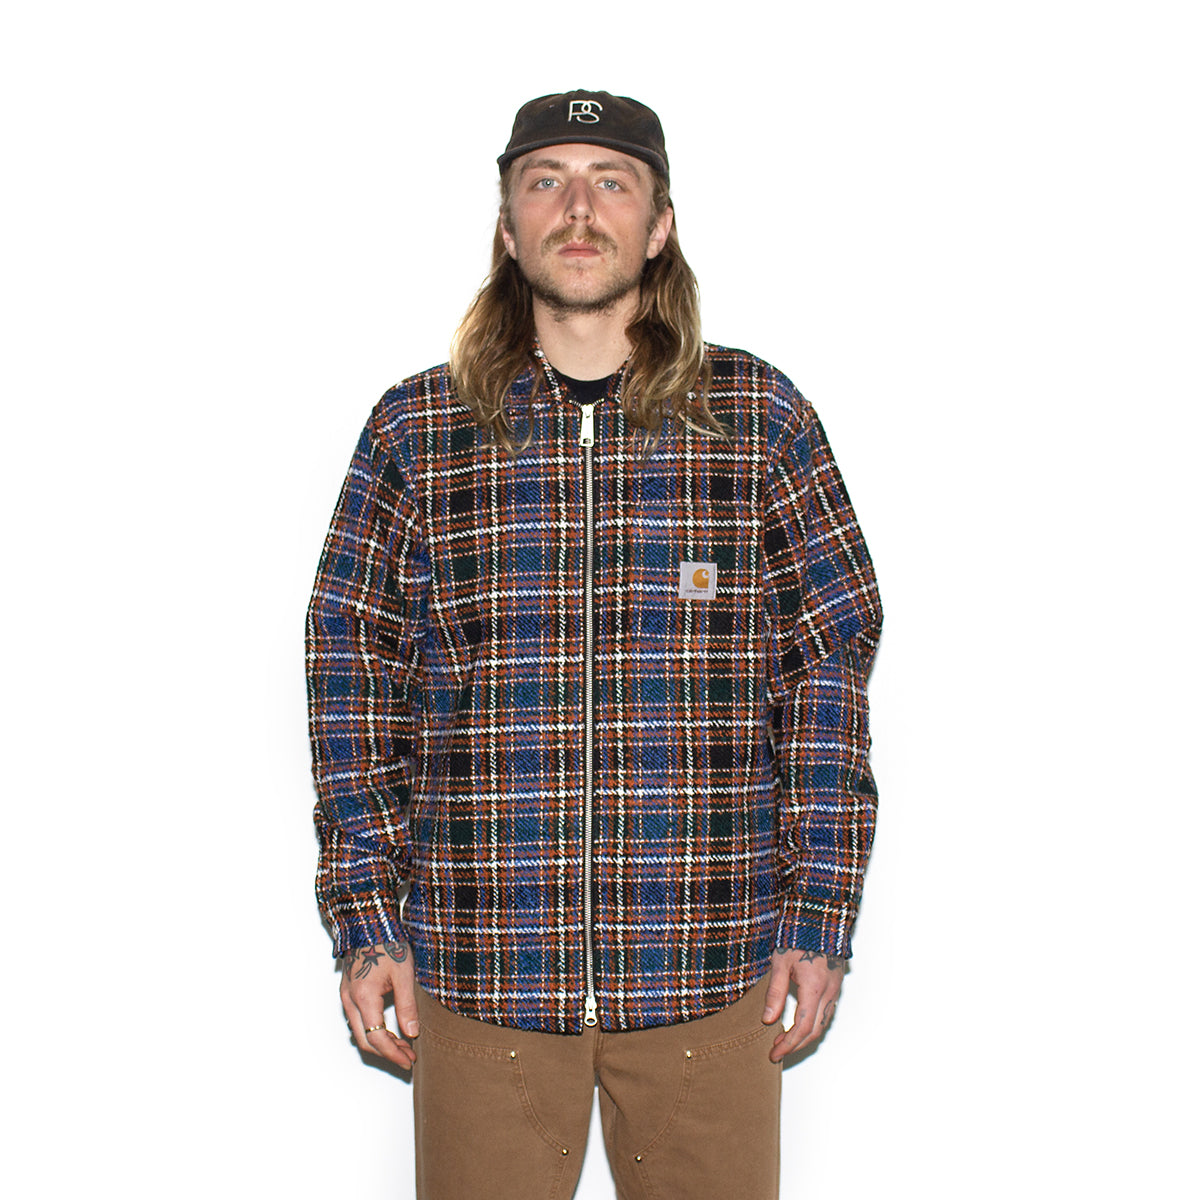 Carhartt WIP | Stroy Shirt Jacket Style # I032213-1PU Color : Stroy Check / Liberty